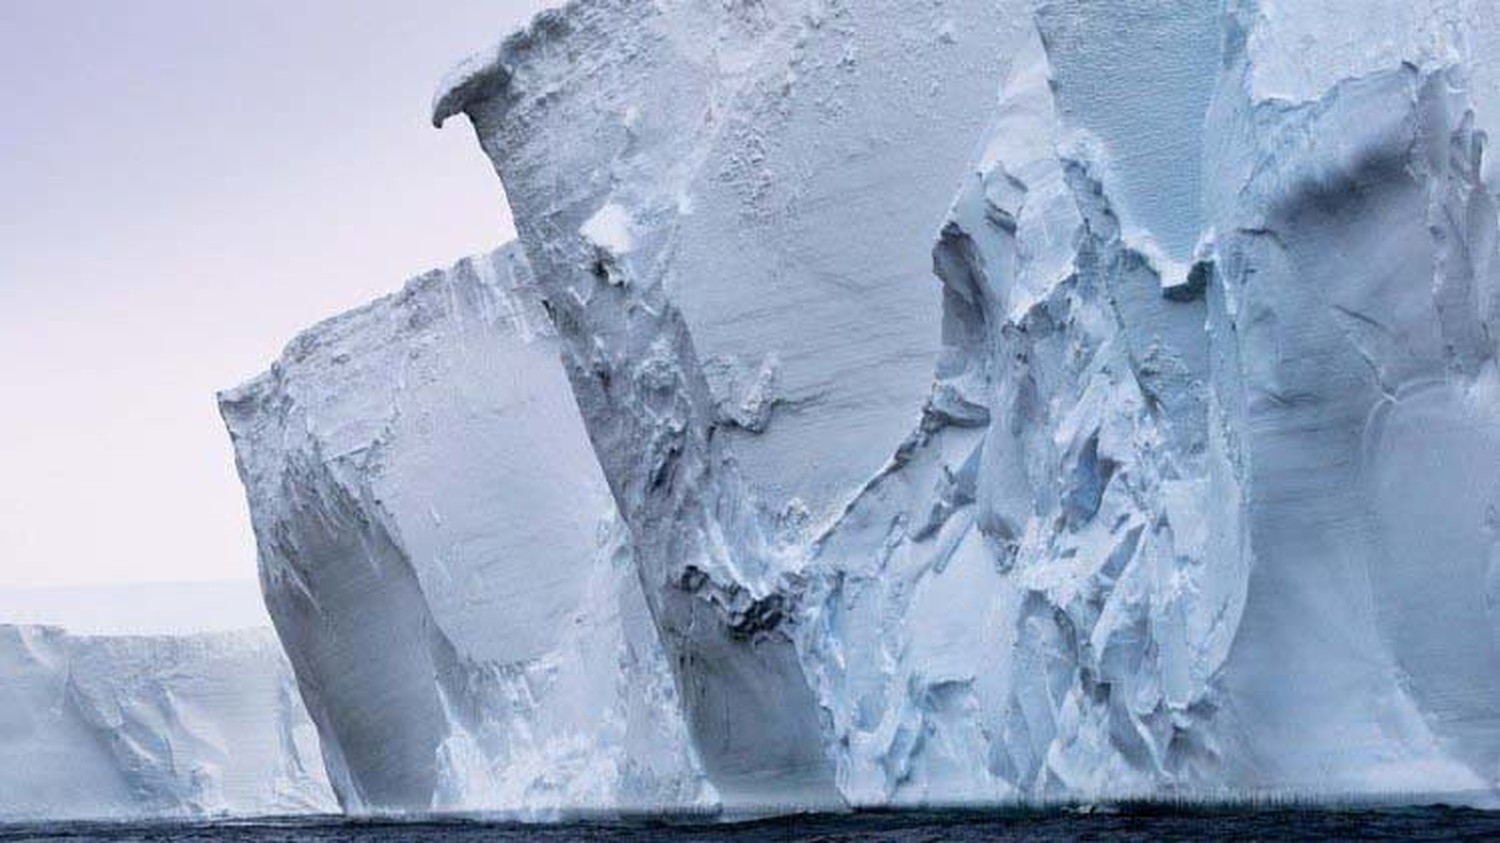 How can you predict the melt rate of a glacier?